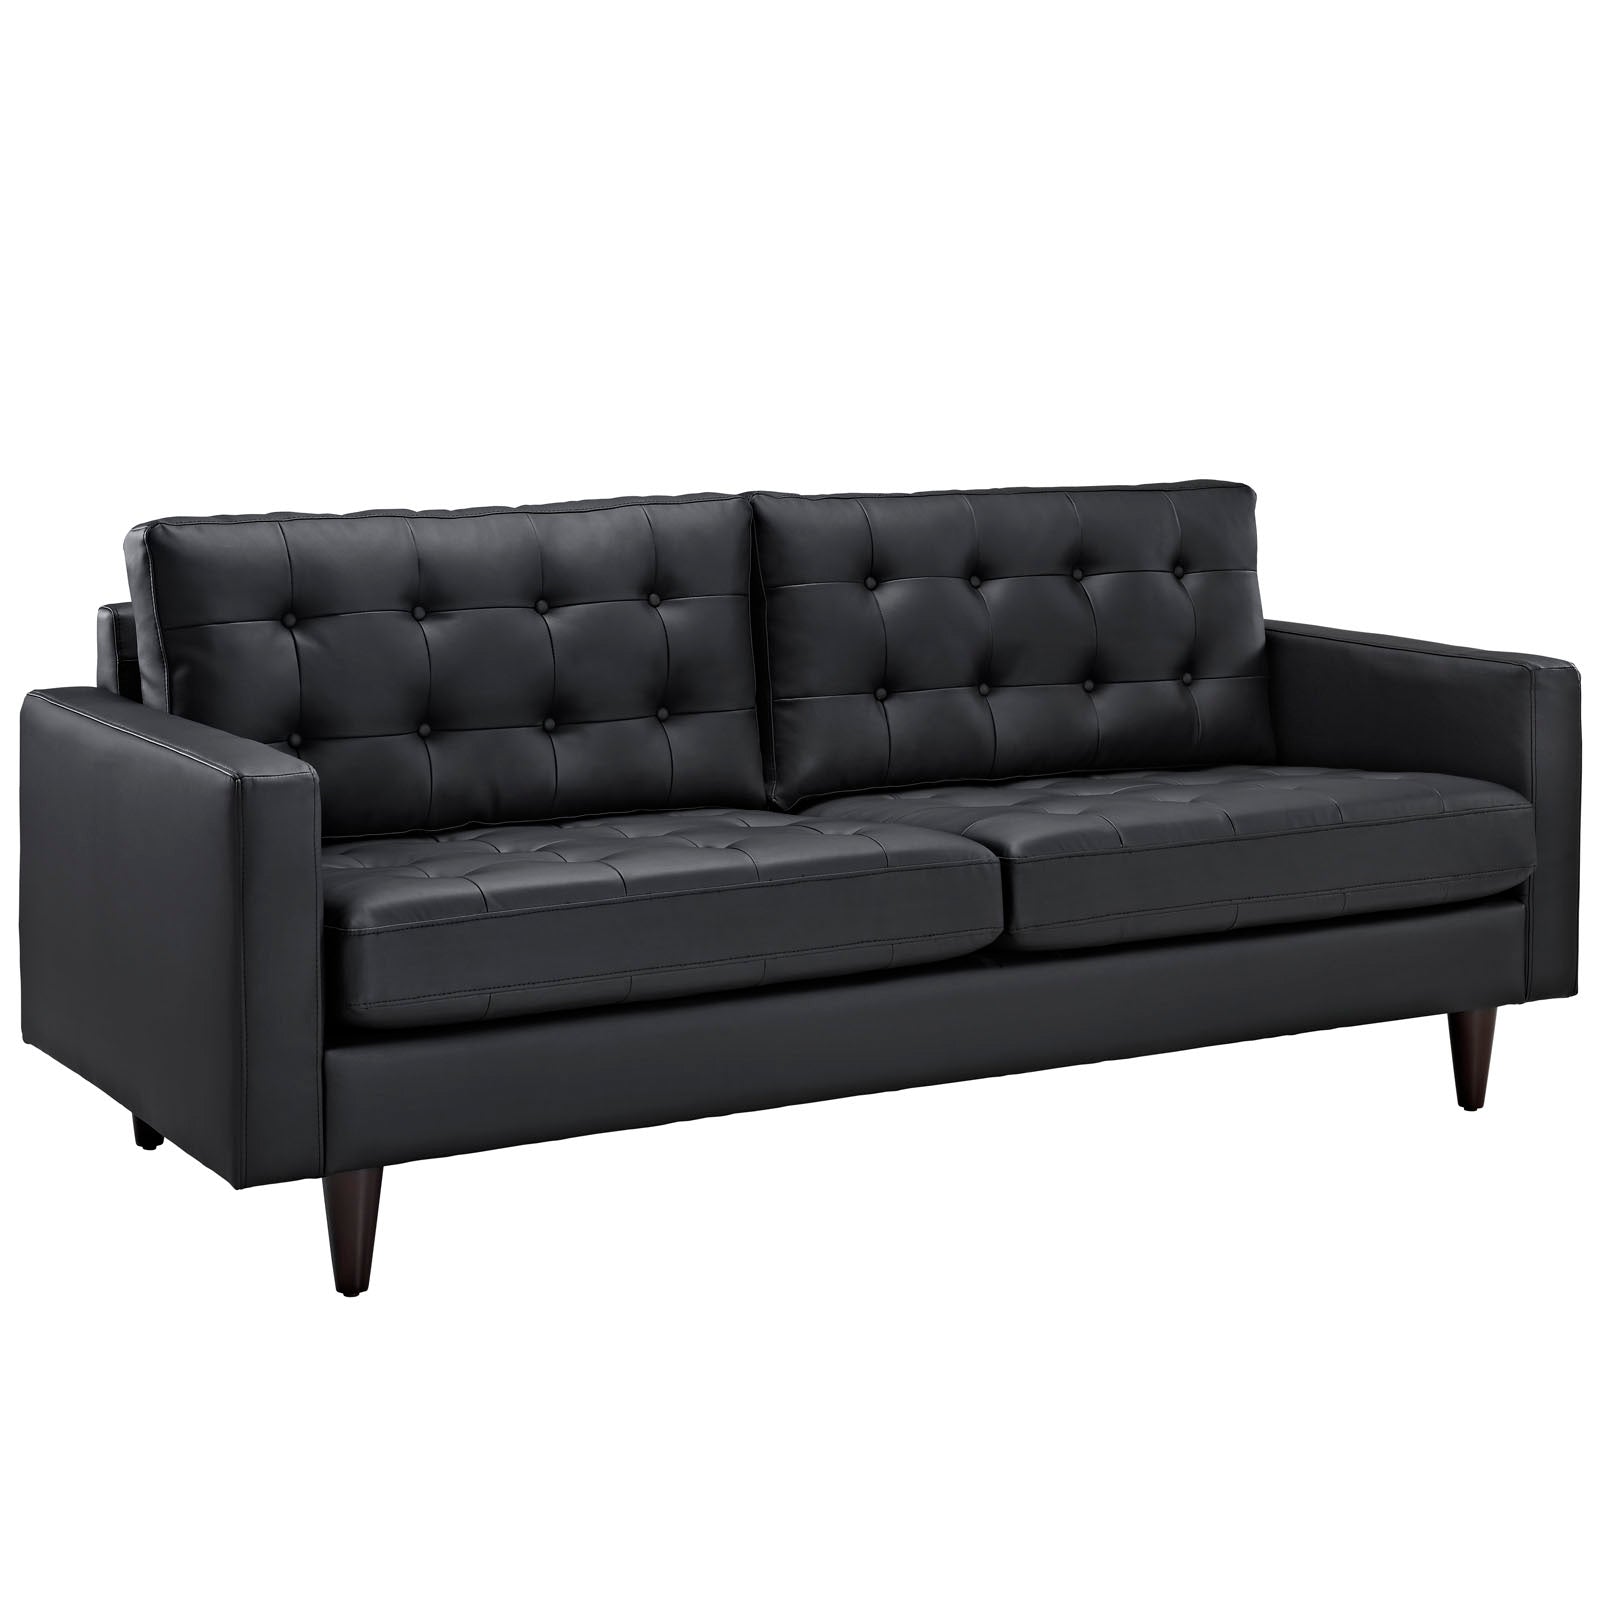 Modway Living Room Sets - Empress Sofa and Armchairs Set of 3 Black